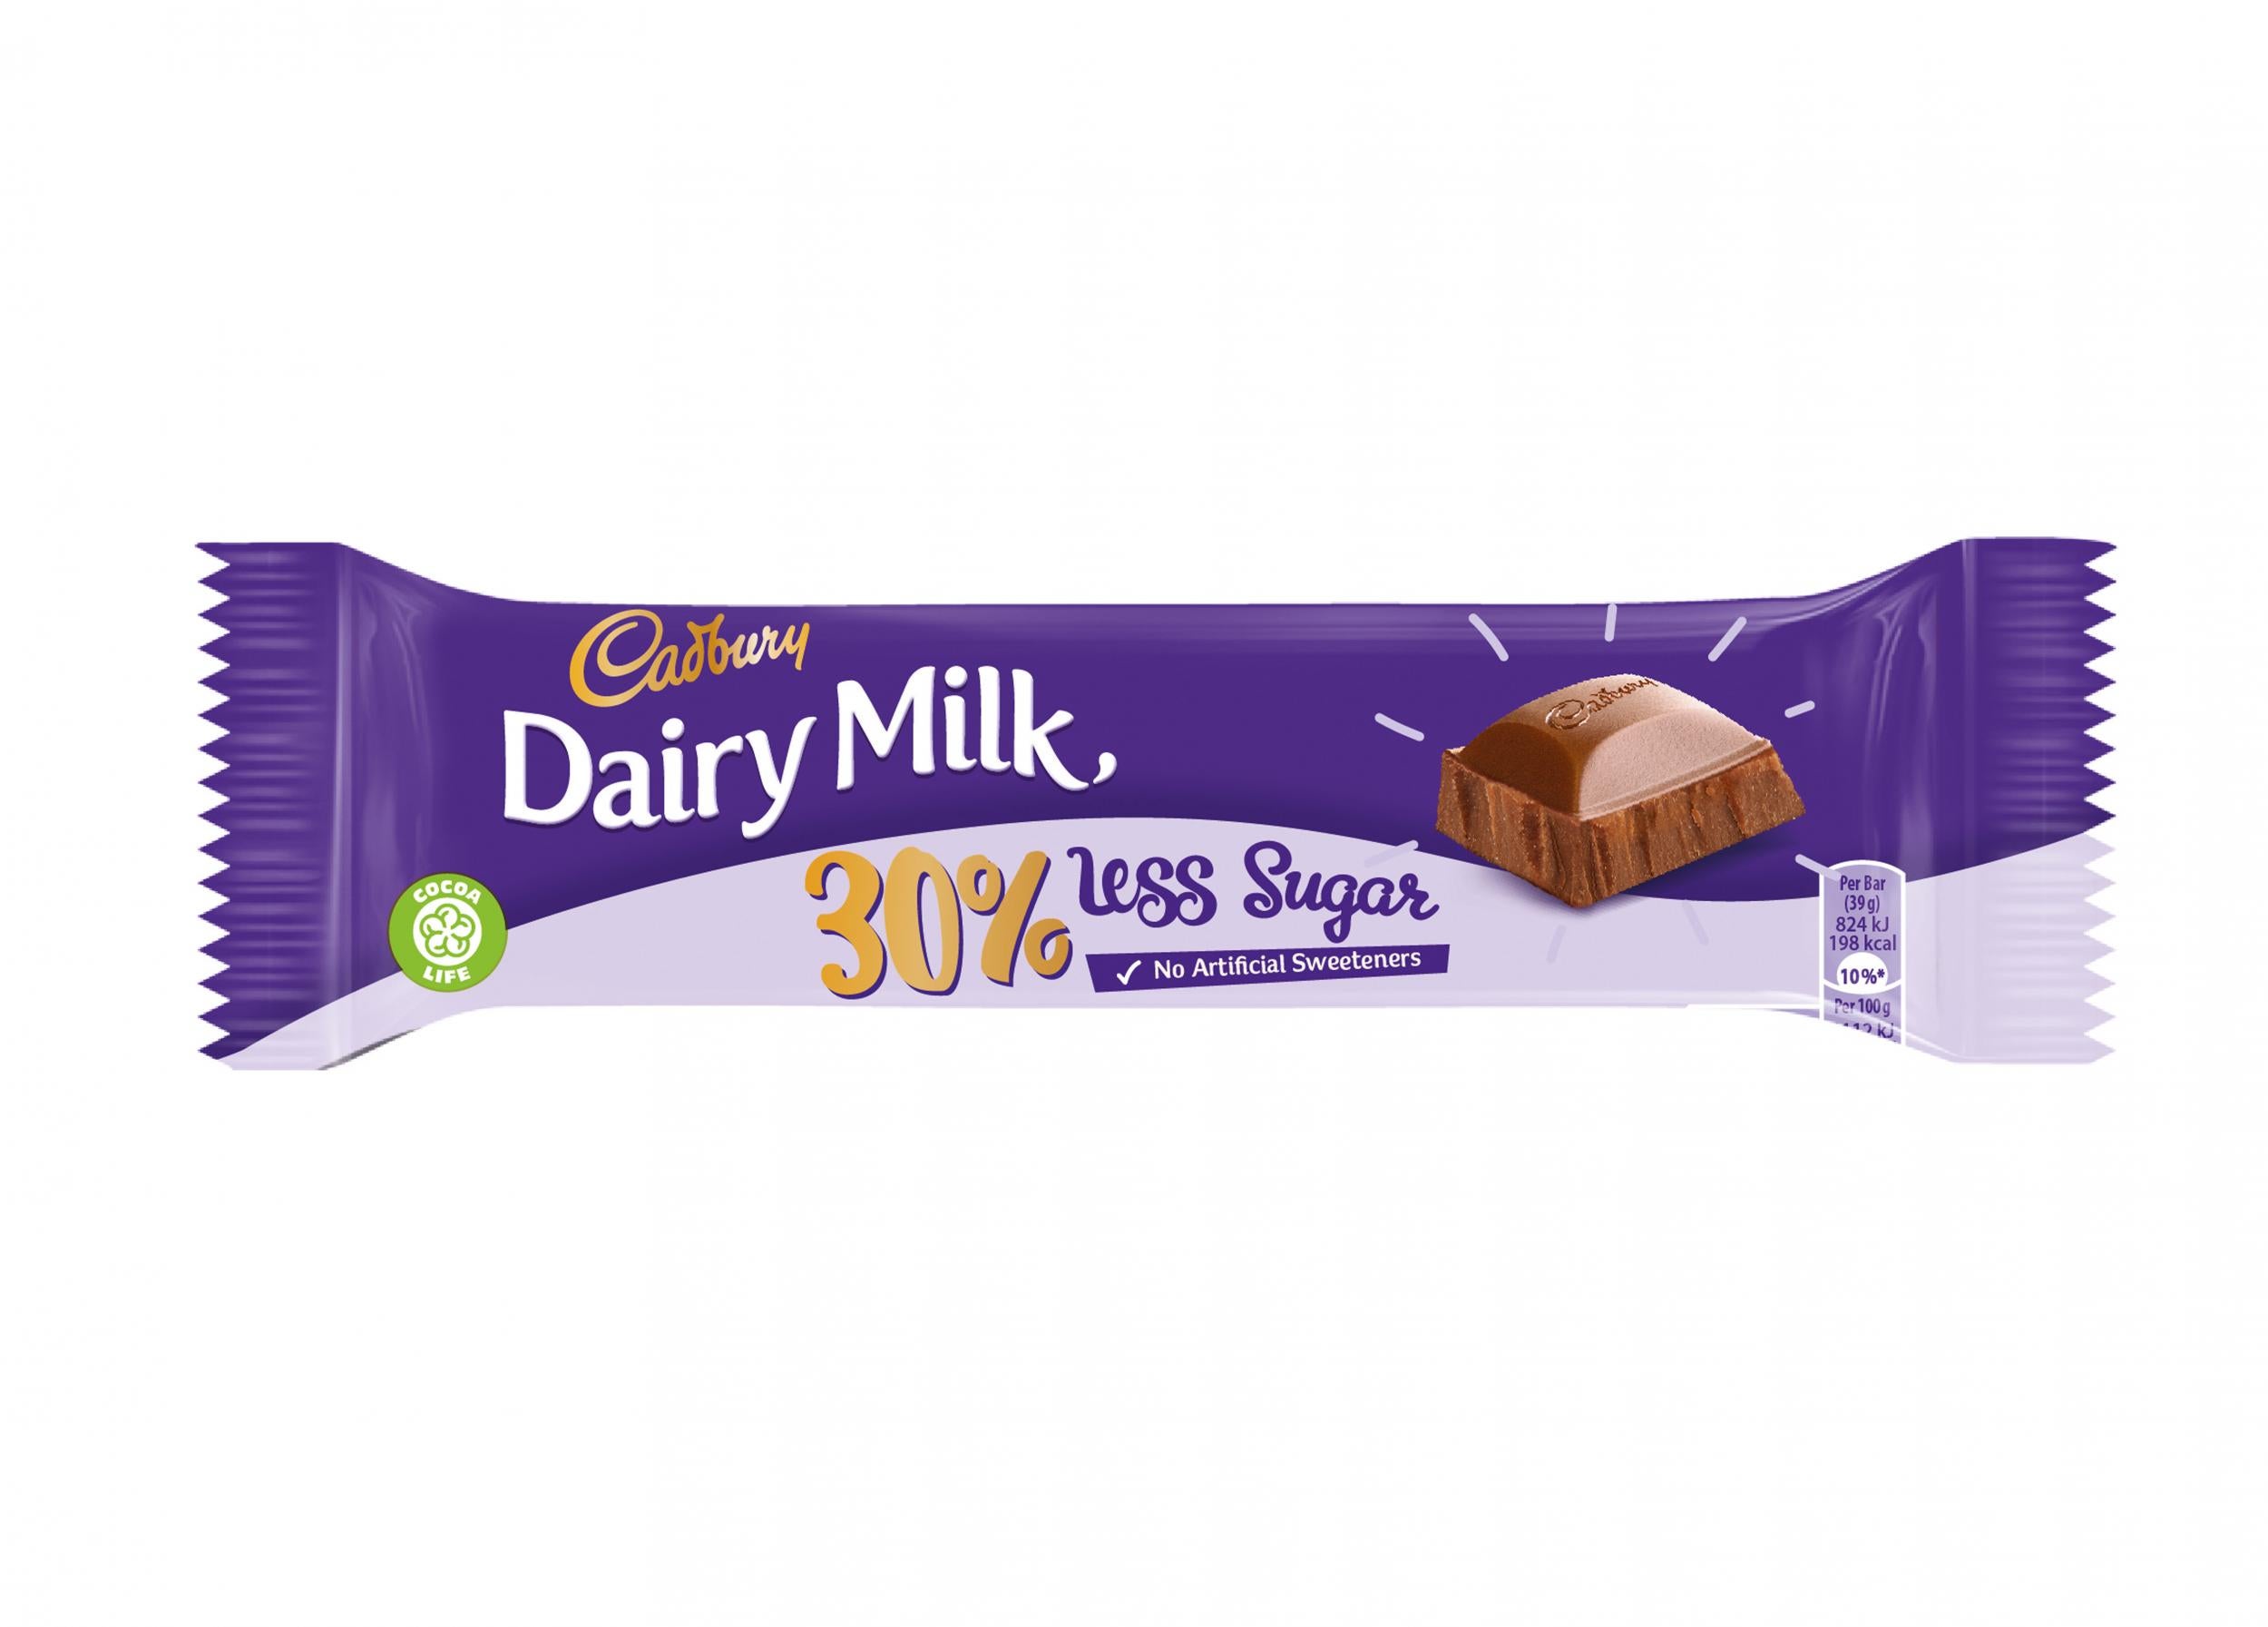 Cadbury owner Mondalez International described the new bar as 'the most significant innovation in the brand's history'